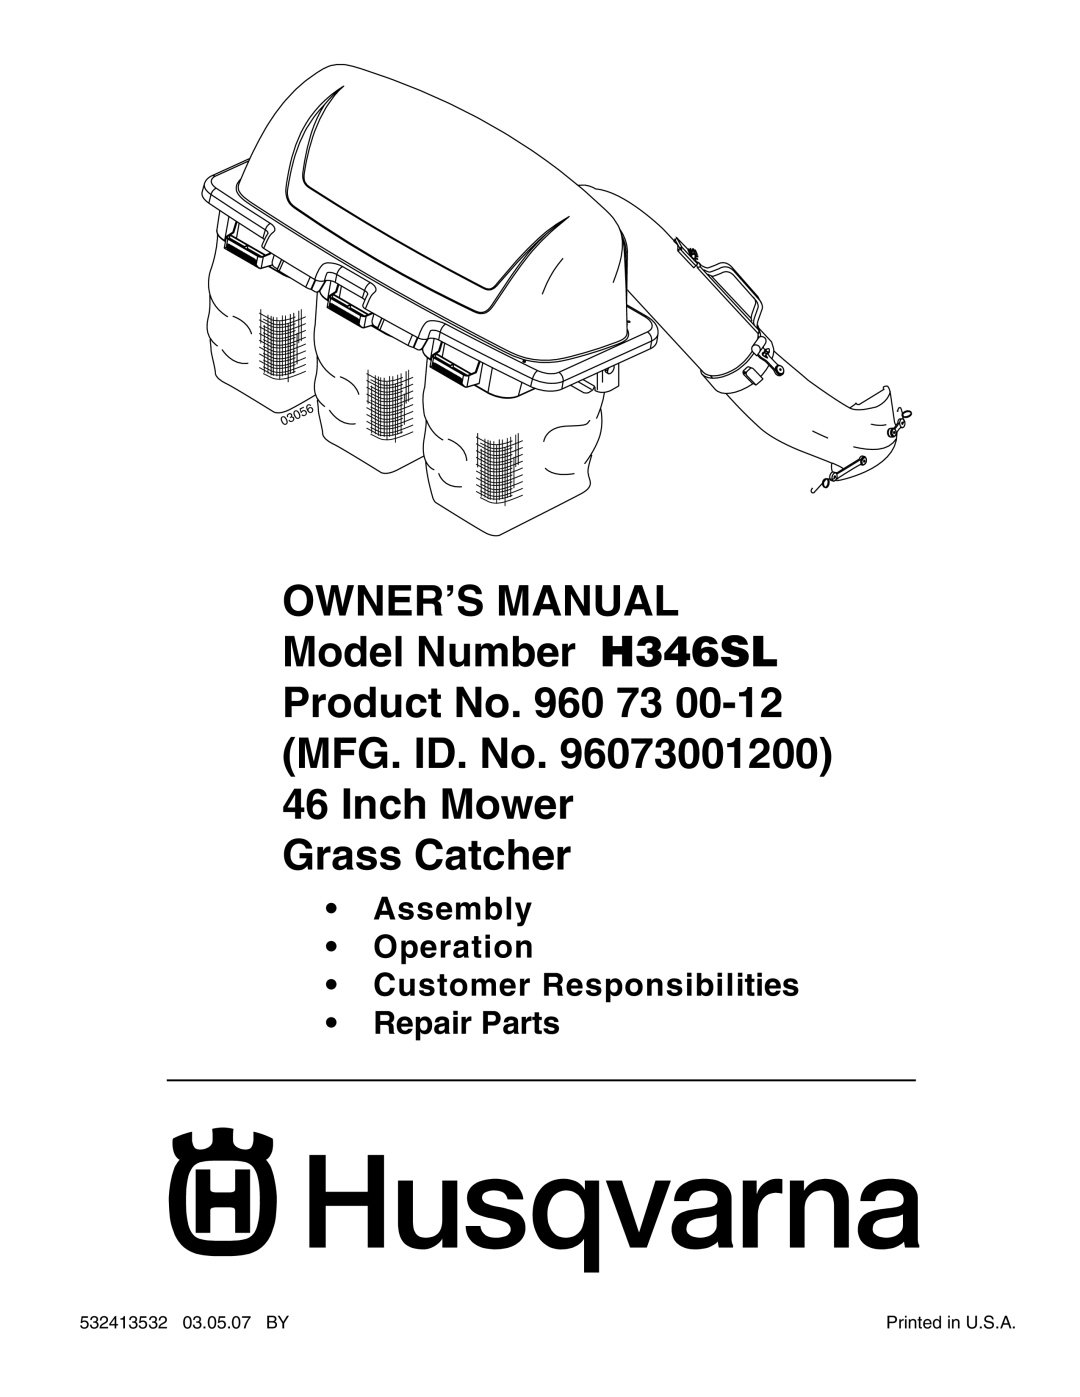 Husqvarna H346SL owner manual Inch Mower Grass Catcher, Assembly Operation Customer Responsibilities Repair Parts 